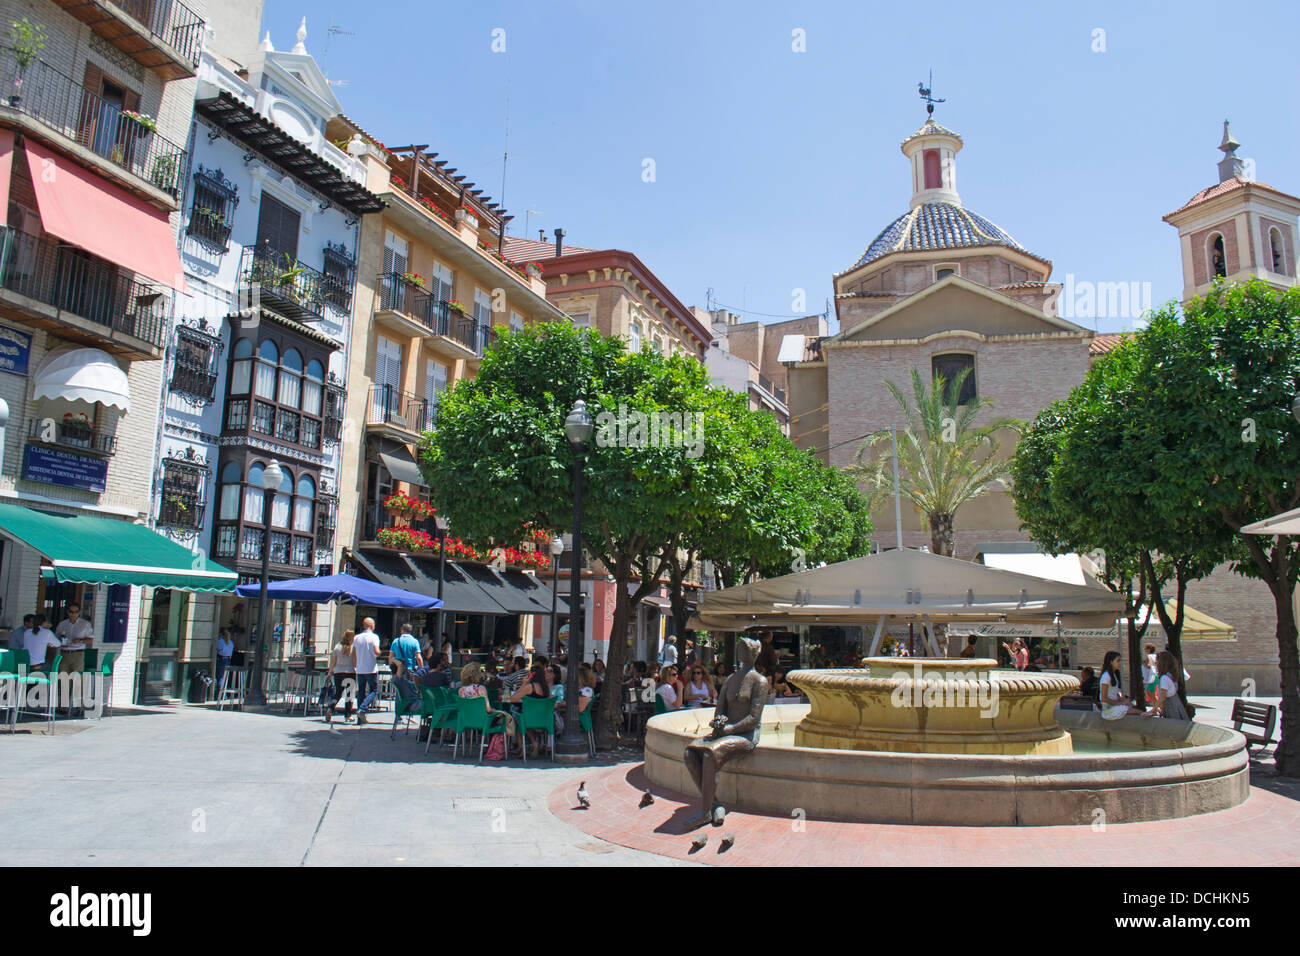 Cafe  & Fountain in the Plaza Las Flores, City of Murcia, Costa Calida, Spain Stock Photo